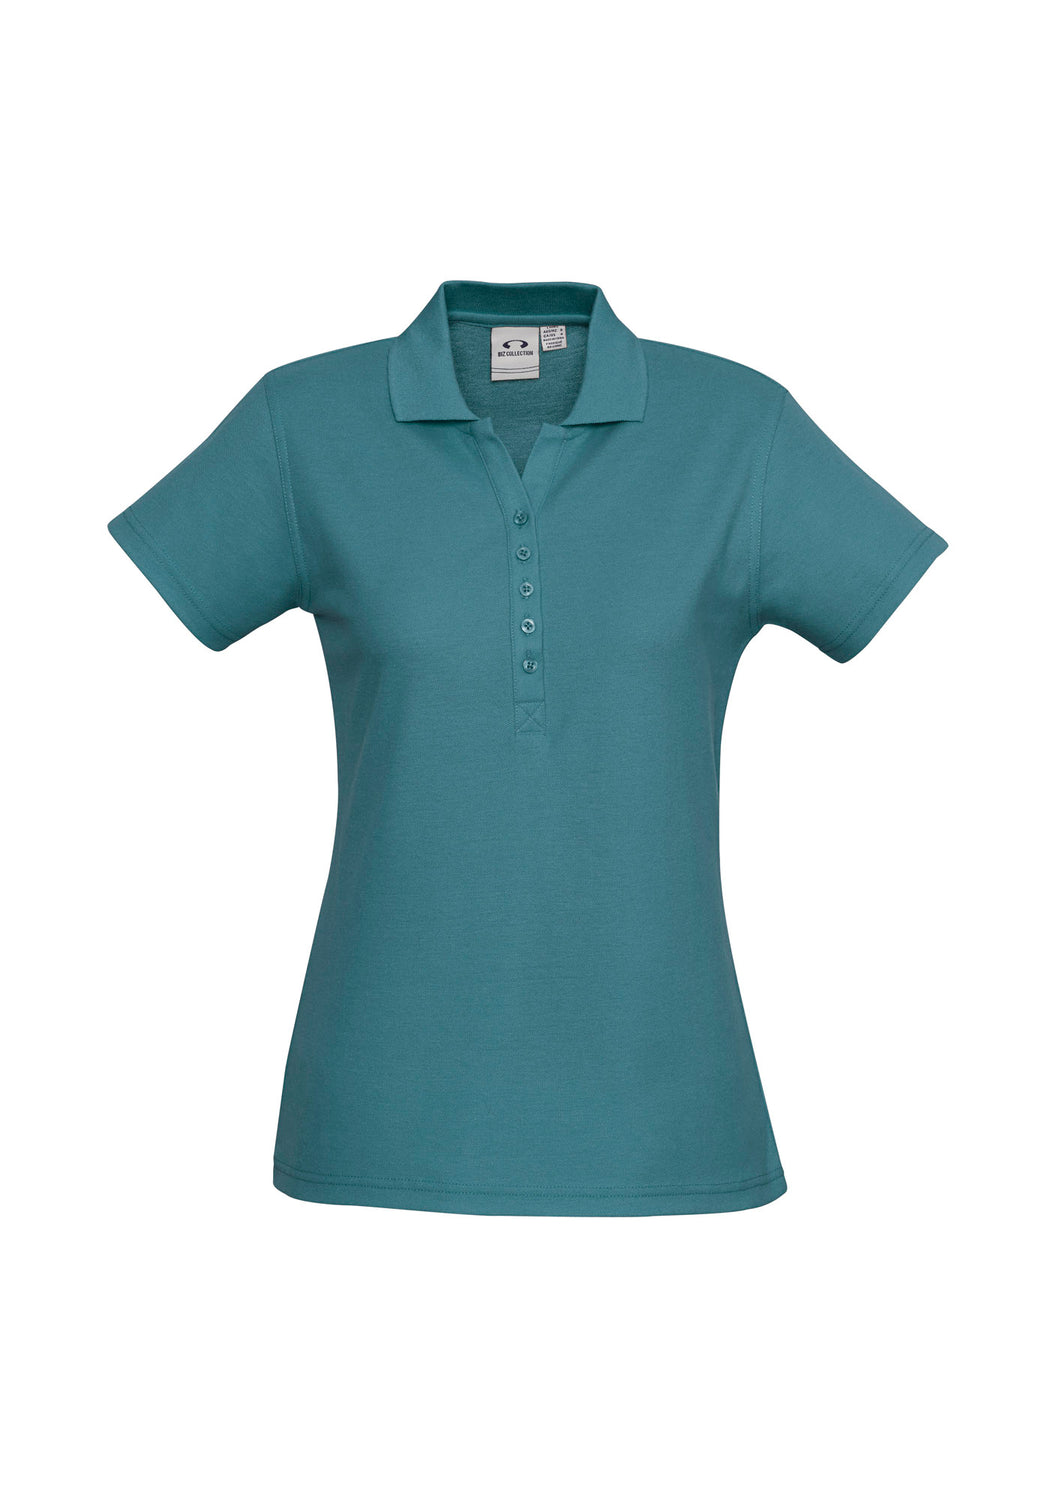 Ladies Classic Pique Knit Polo - Teal